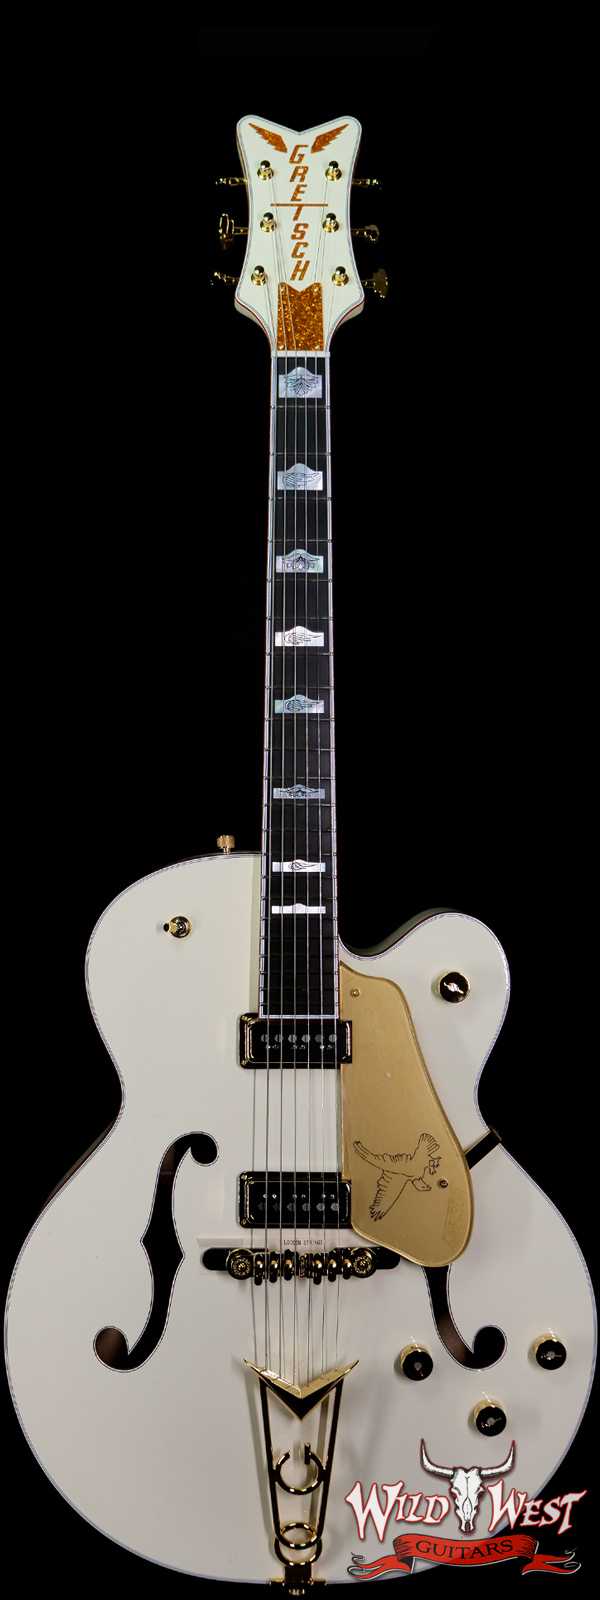 Gretsch G6136-55 Vintage Select Edition ‘55 Falcon Hollow Body with Cadillac Tailpiece TV Jones T-Armond Pickups Vintage White